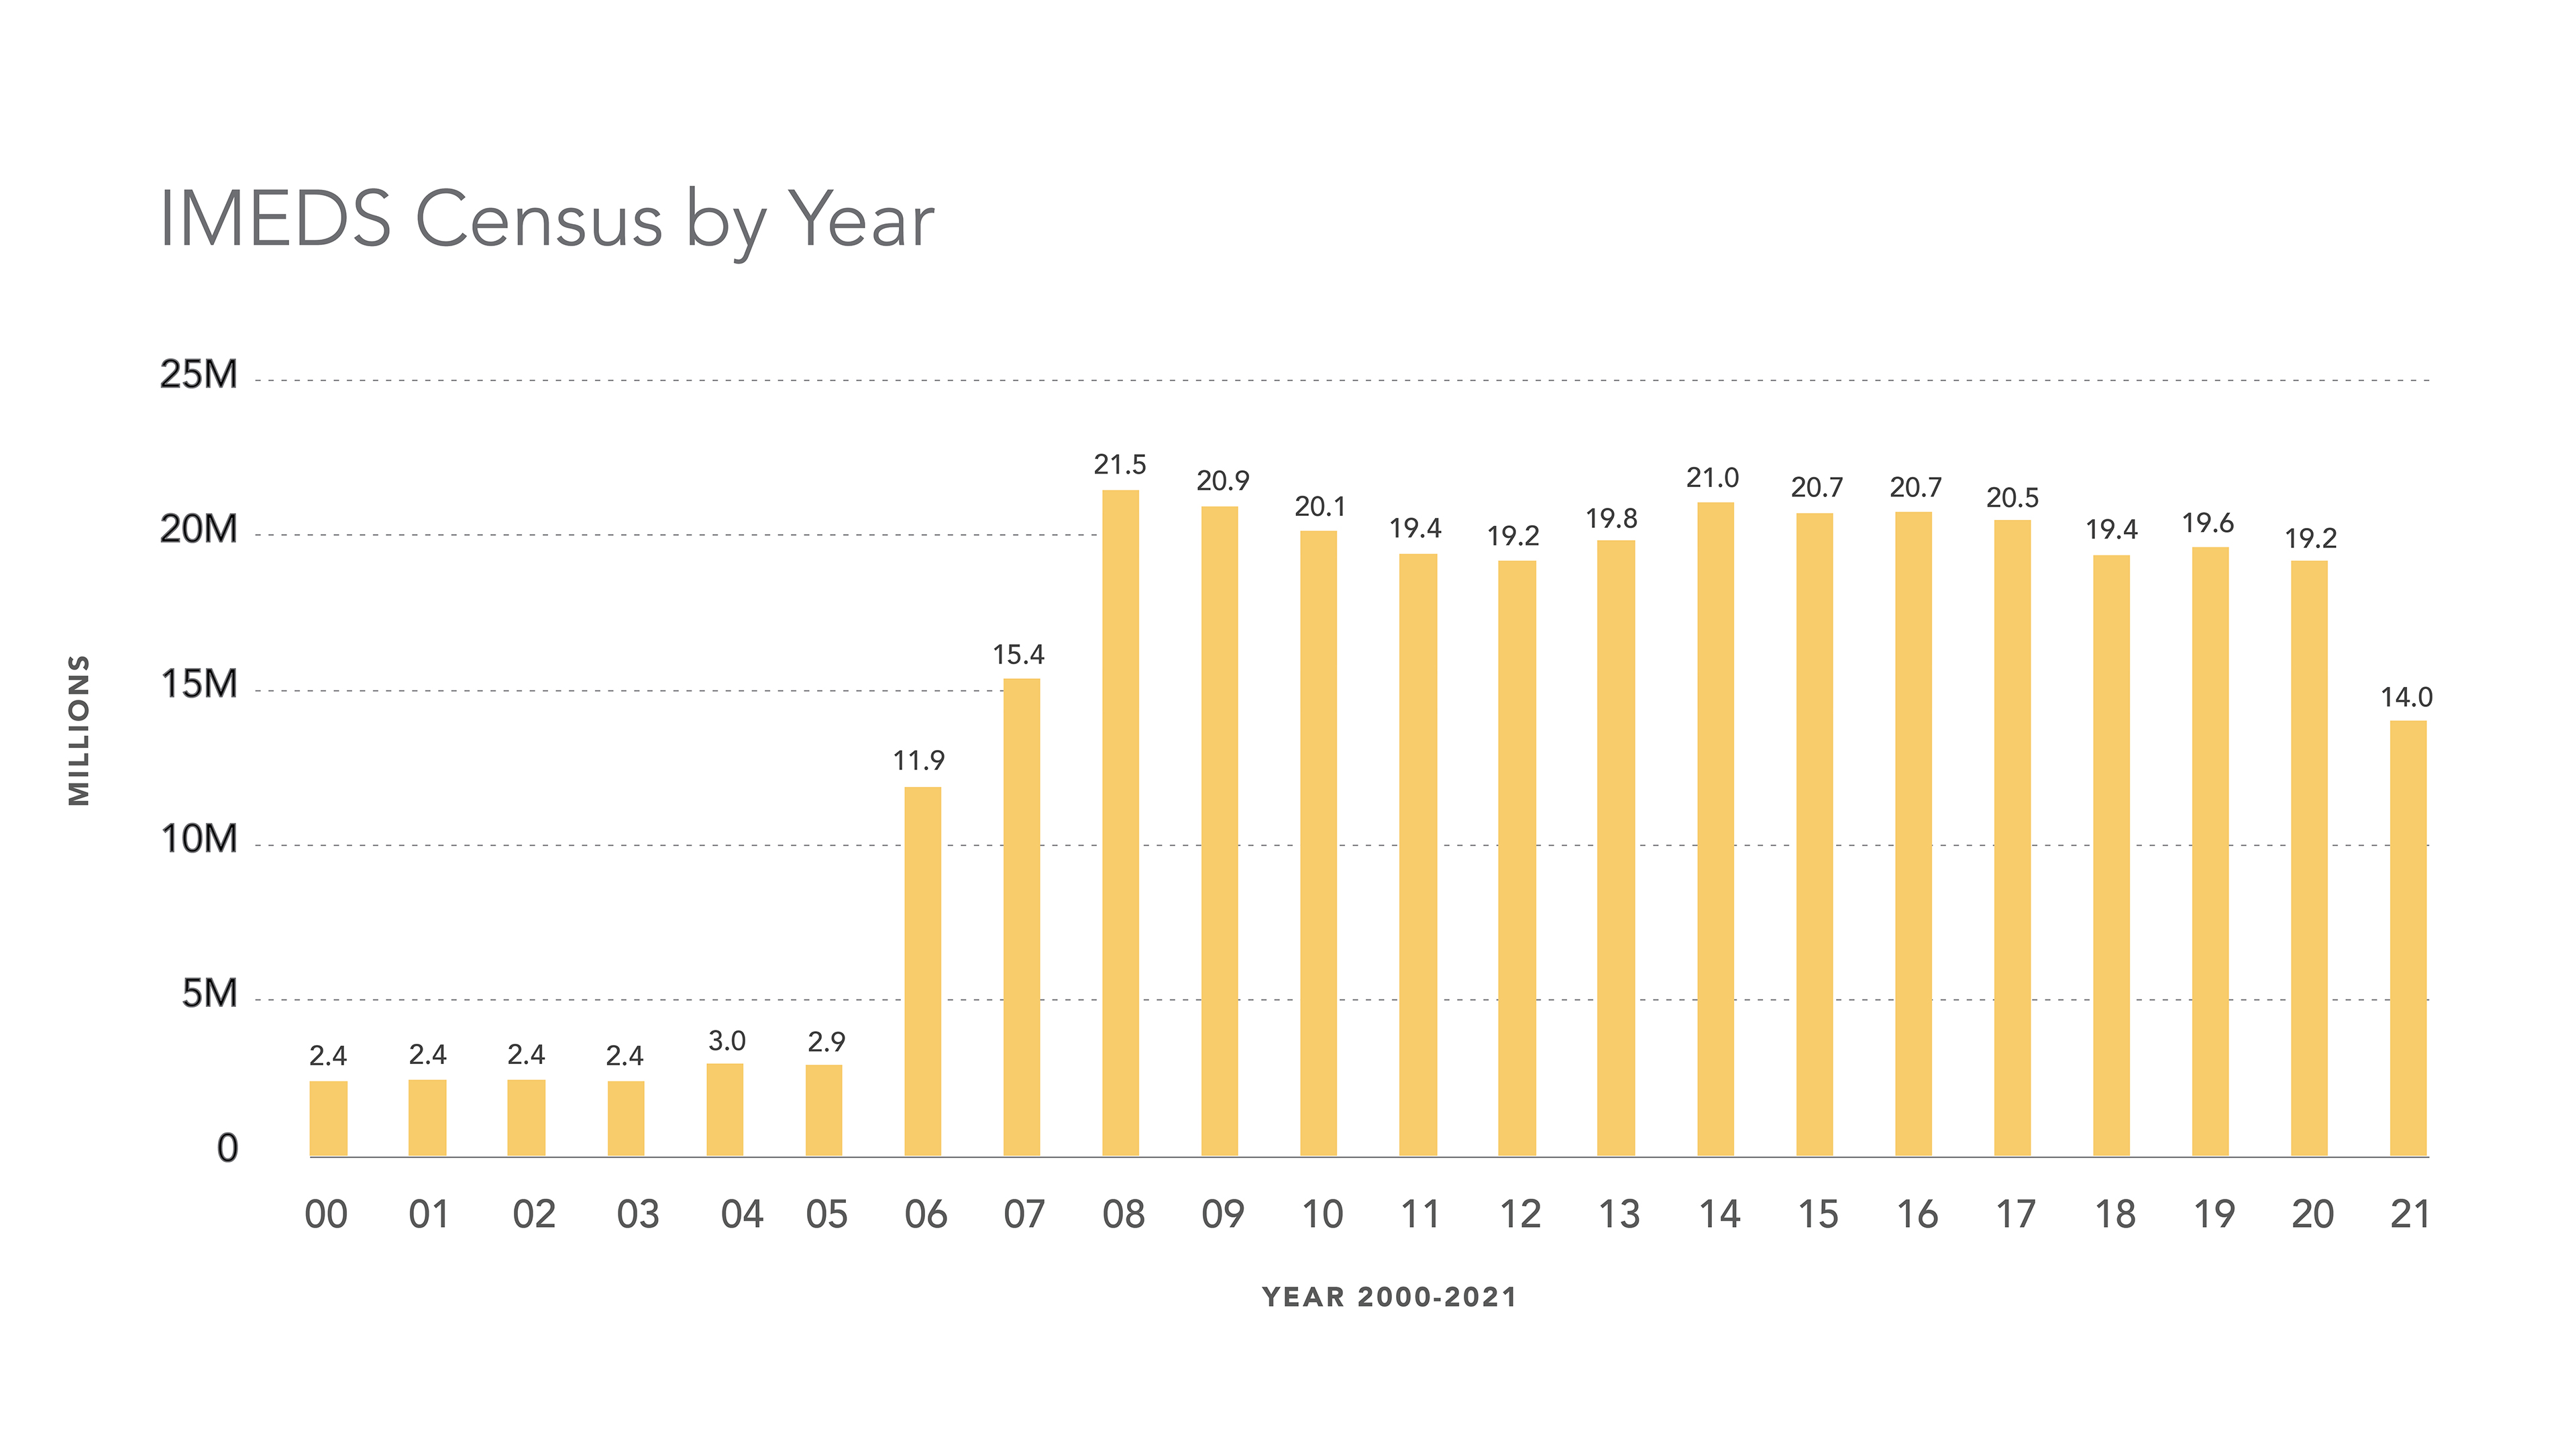 IMEDS Census by Year